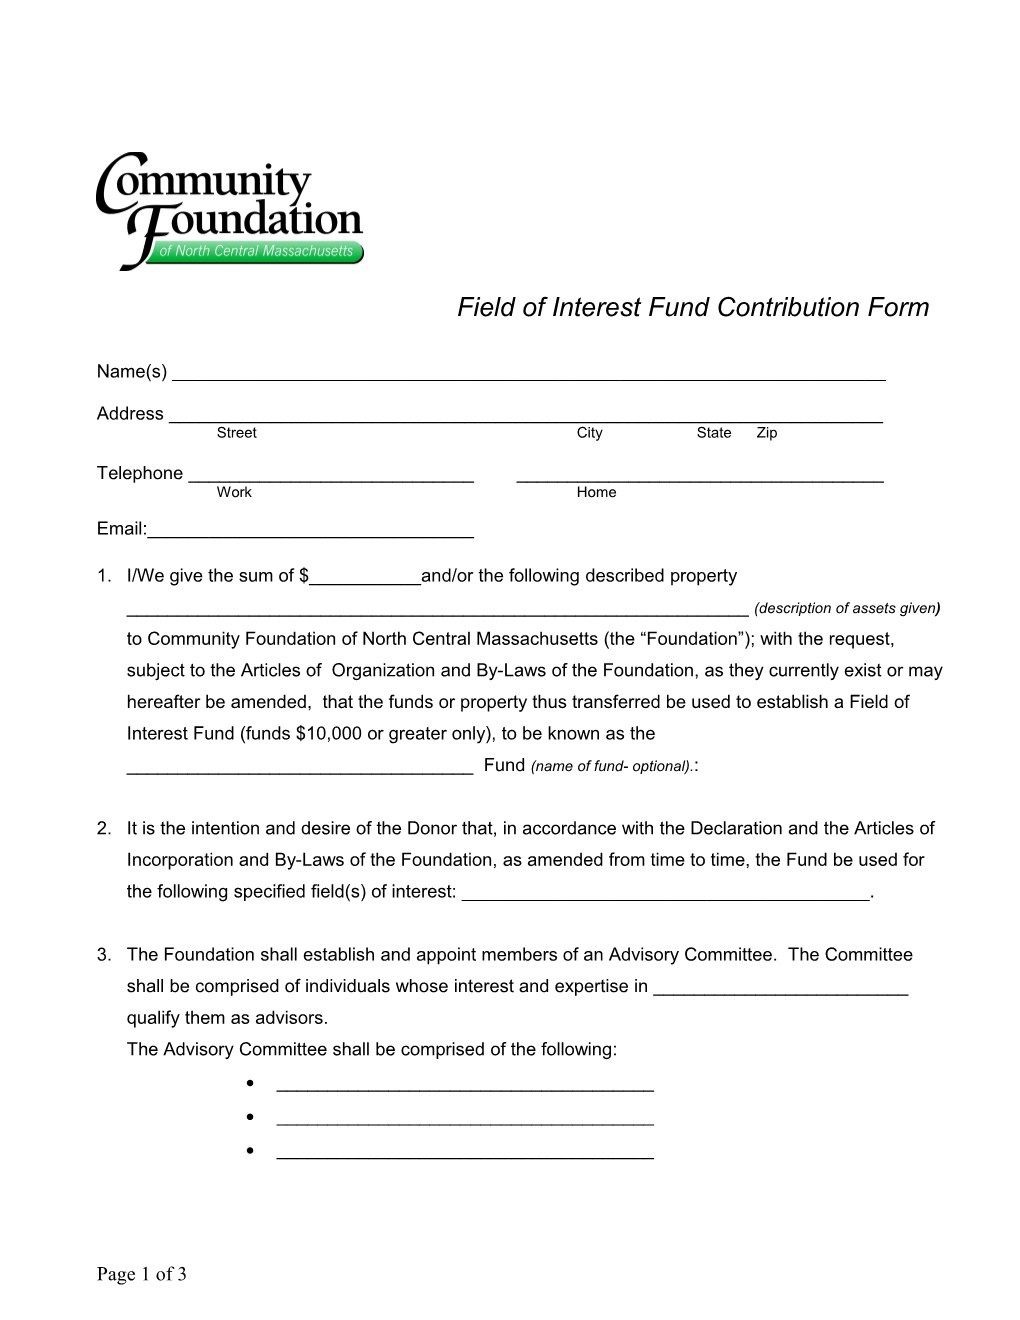 Field of Interest Fund Contribution Form